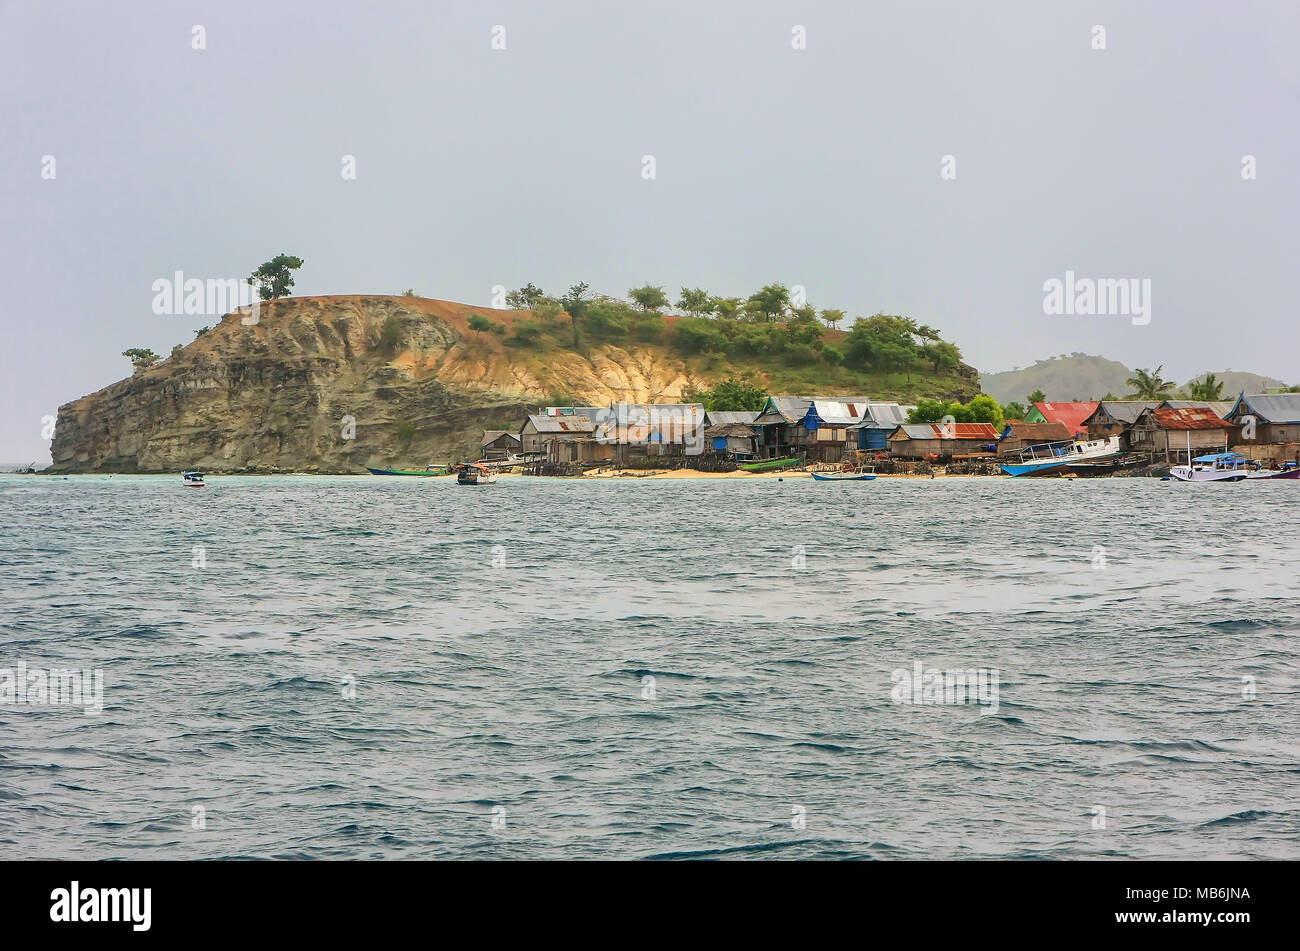 Small island with typical village in Komodo National Park, Nusa Tenggara, Indonesia. Komodo National Park is home to about 3500 people. Stock Photo